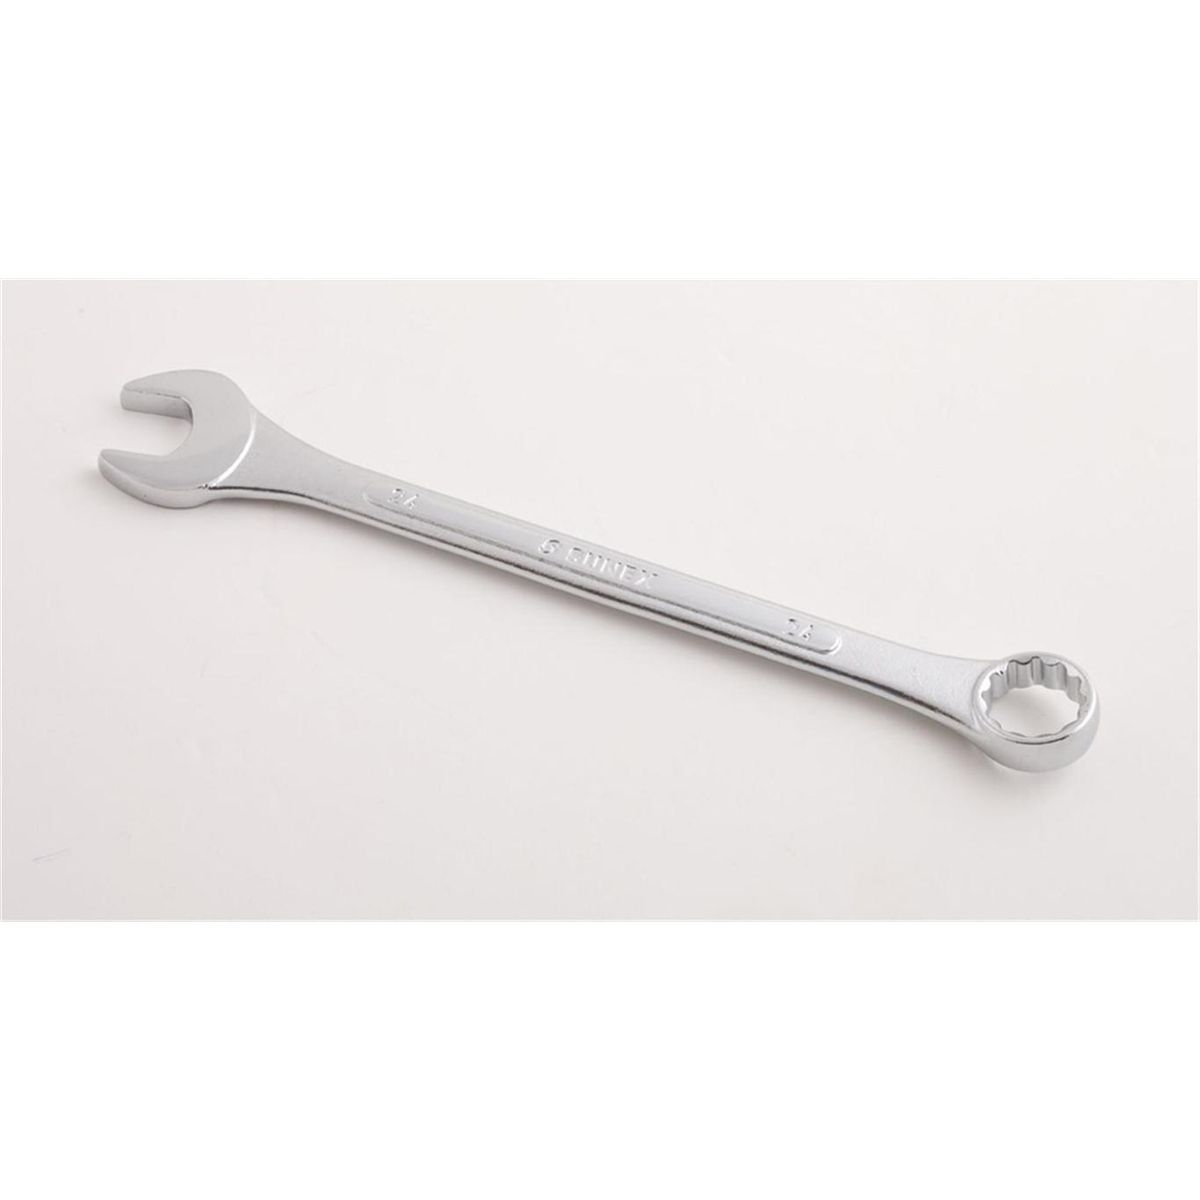 24mm Raised Panel Combination Wrench